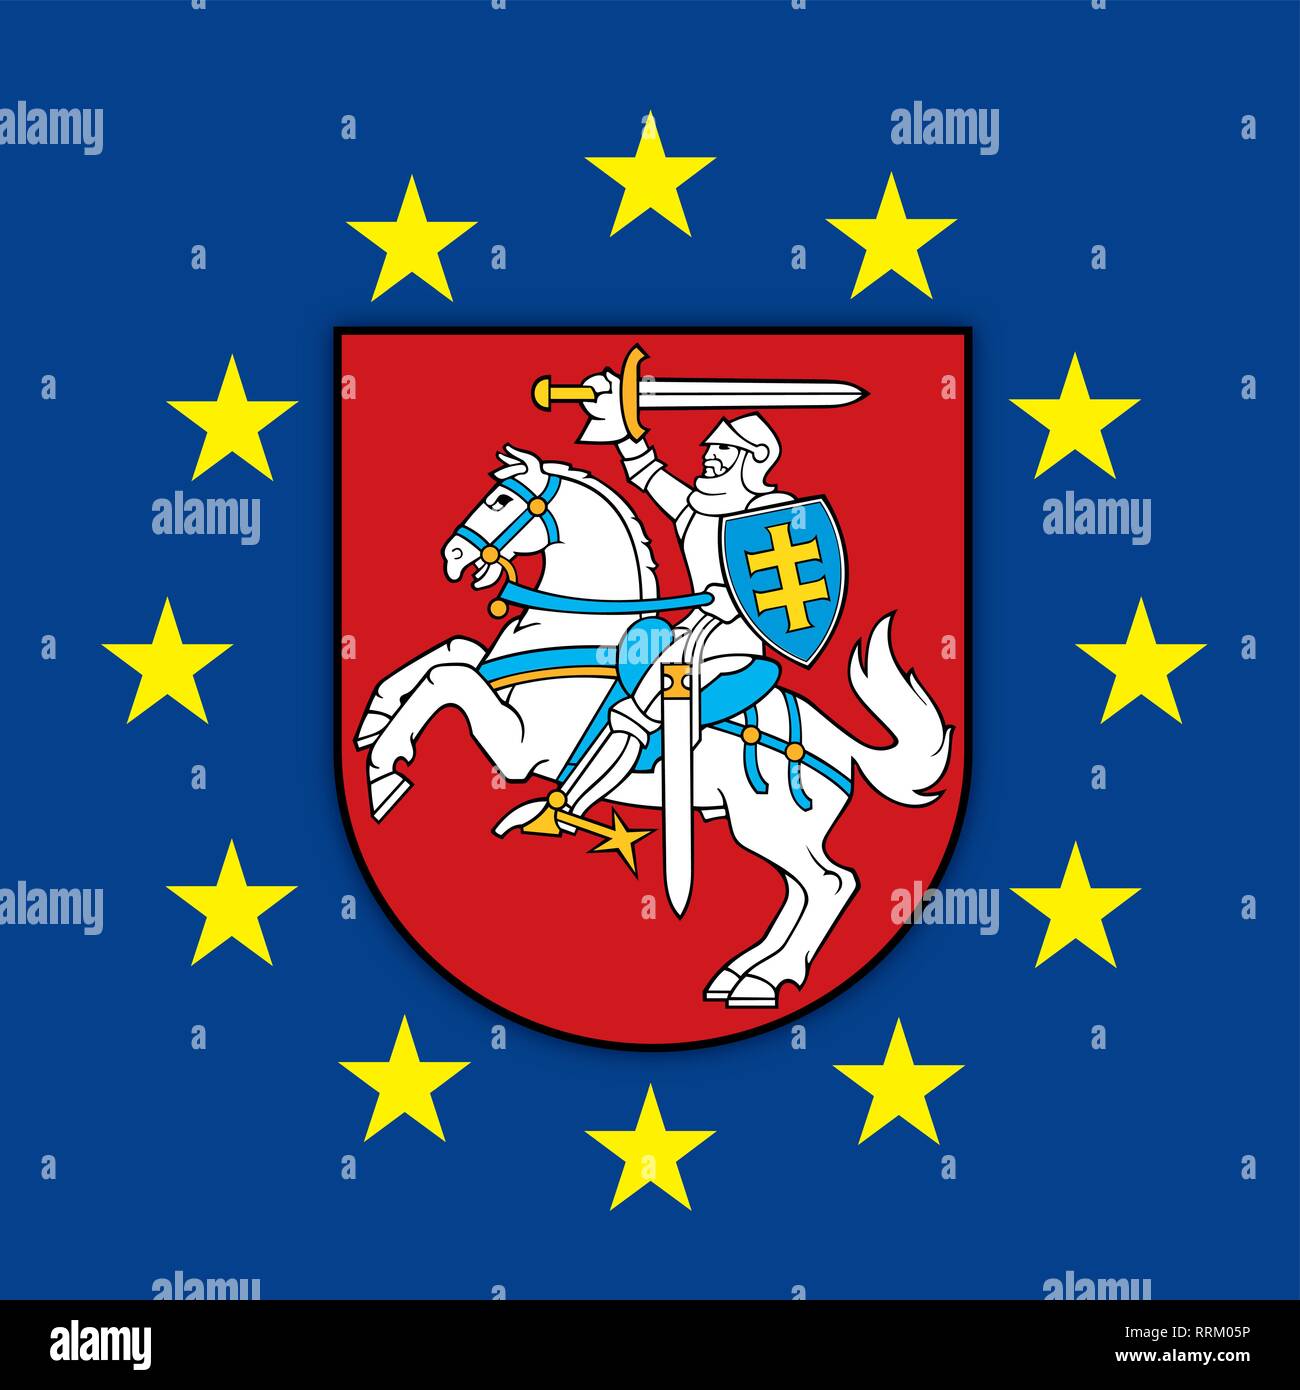 Lithuania coat of arms on the European Union flag, vector illustration Stock Vector